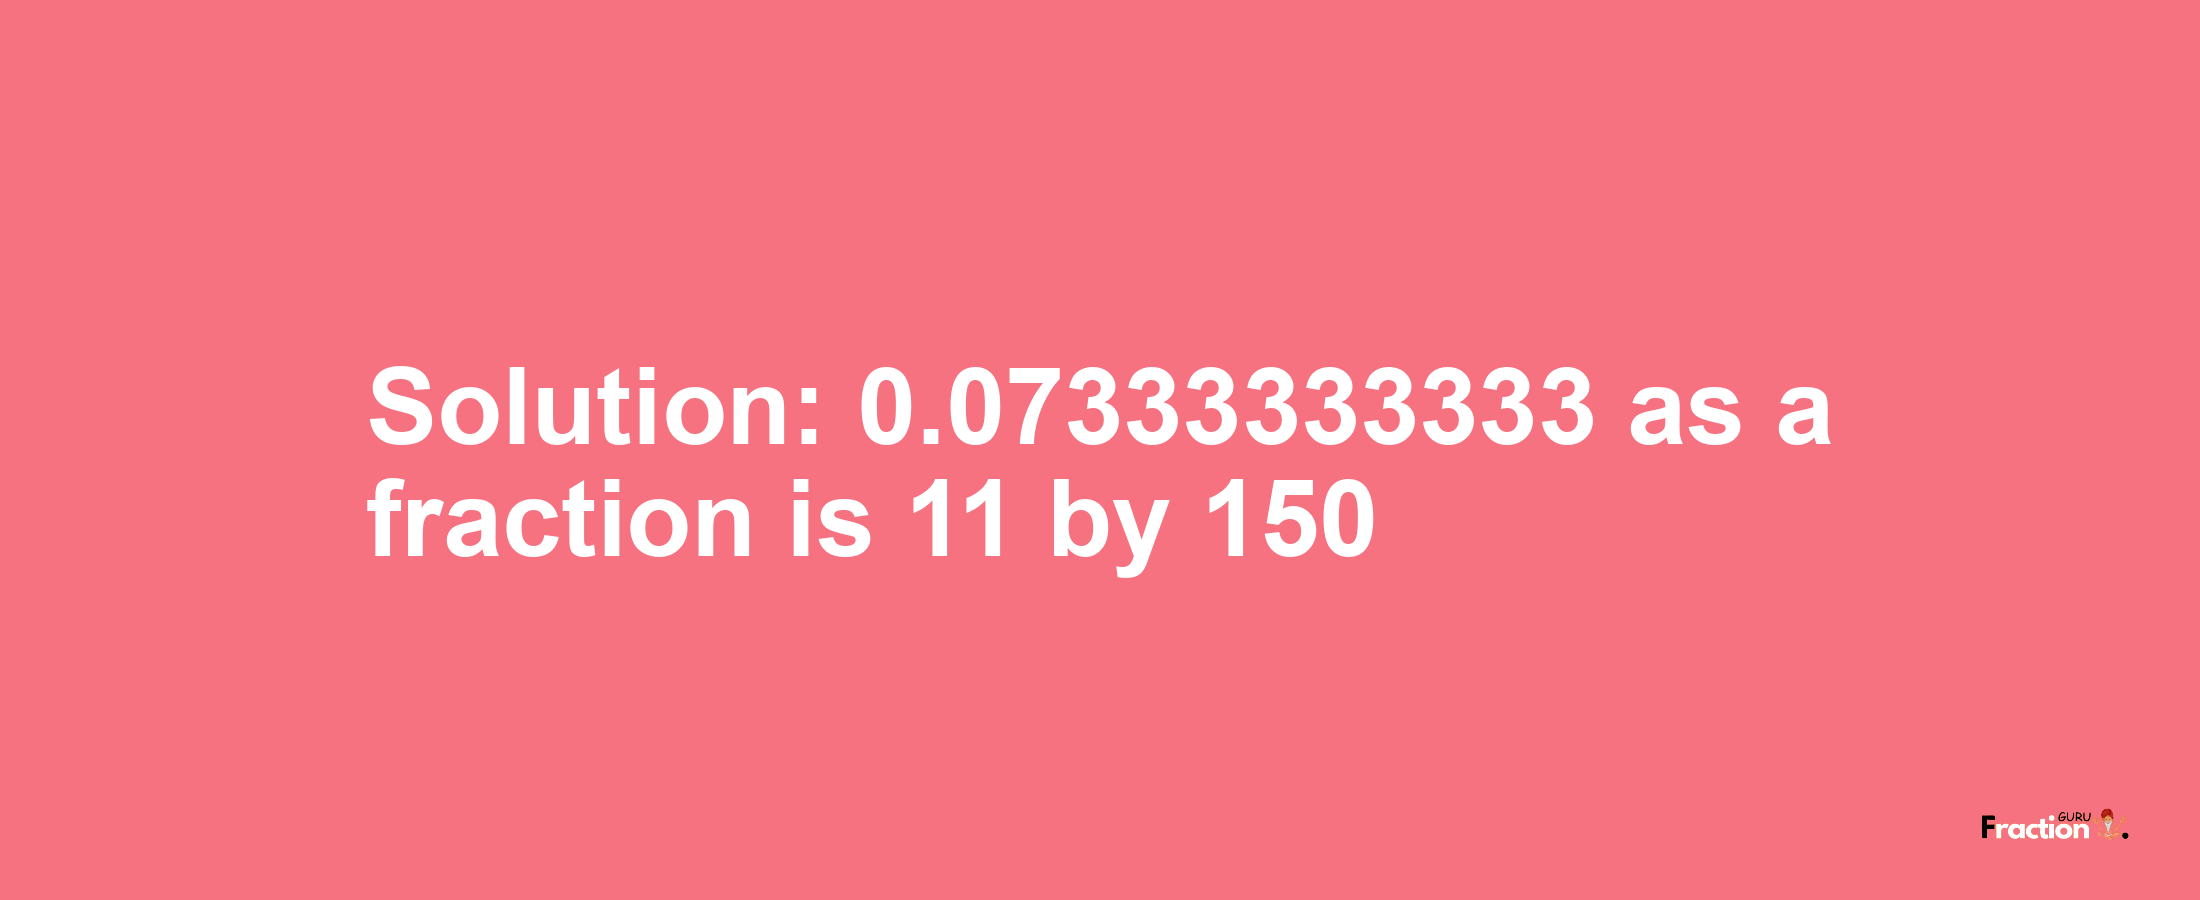 Solution:0.07333333333 as a fraction is 11/150